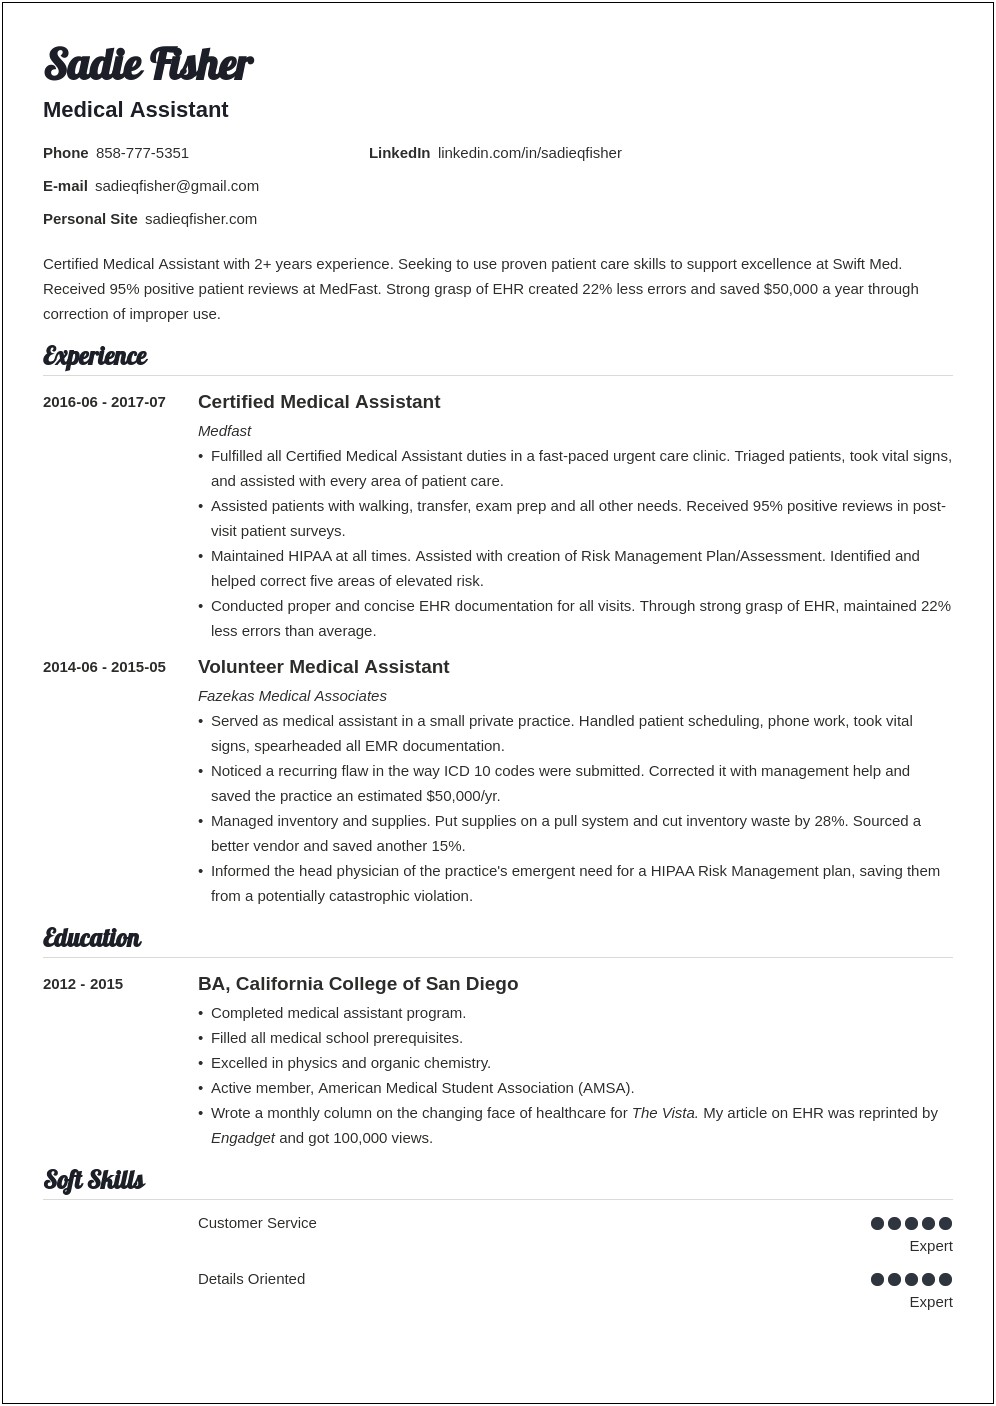 Resume Summary Examples Medical Assistant